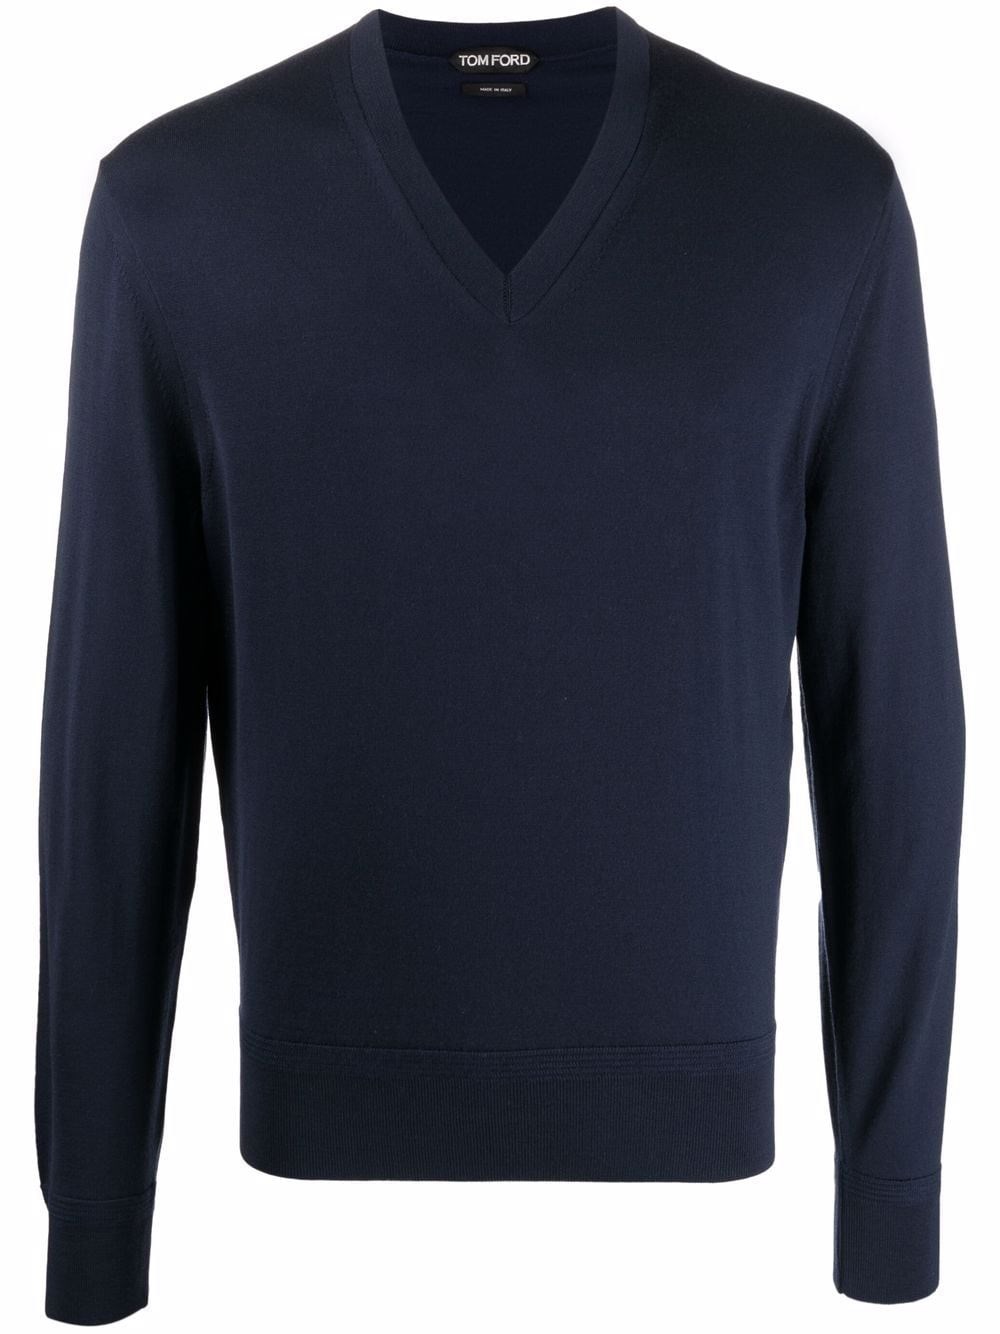 tom ford PULLOVER SCOLLO V TOM FORD available on montiboutique.com - 43926